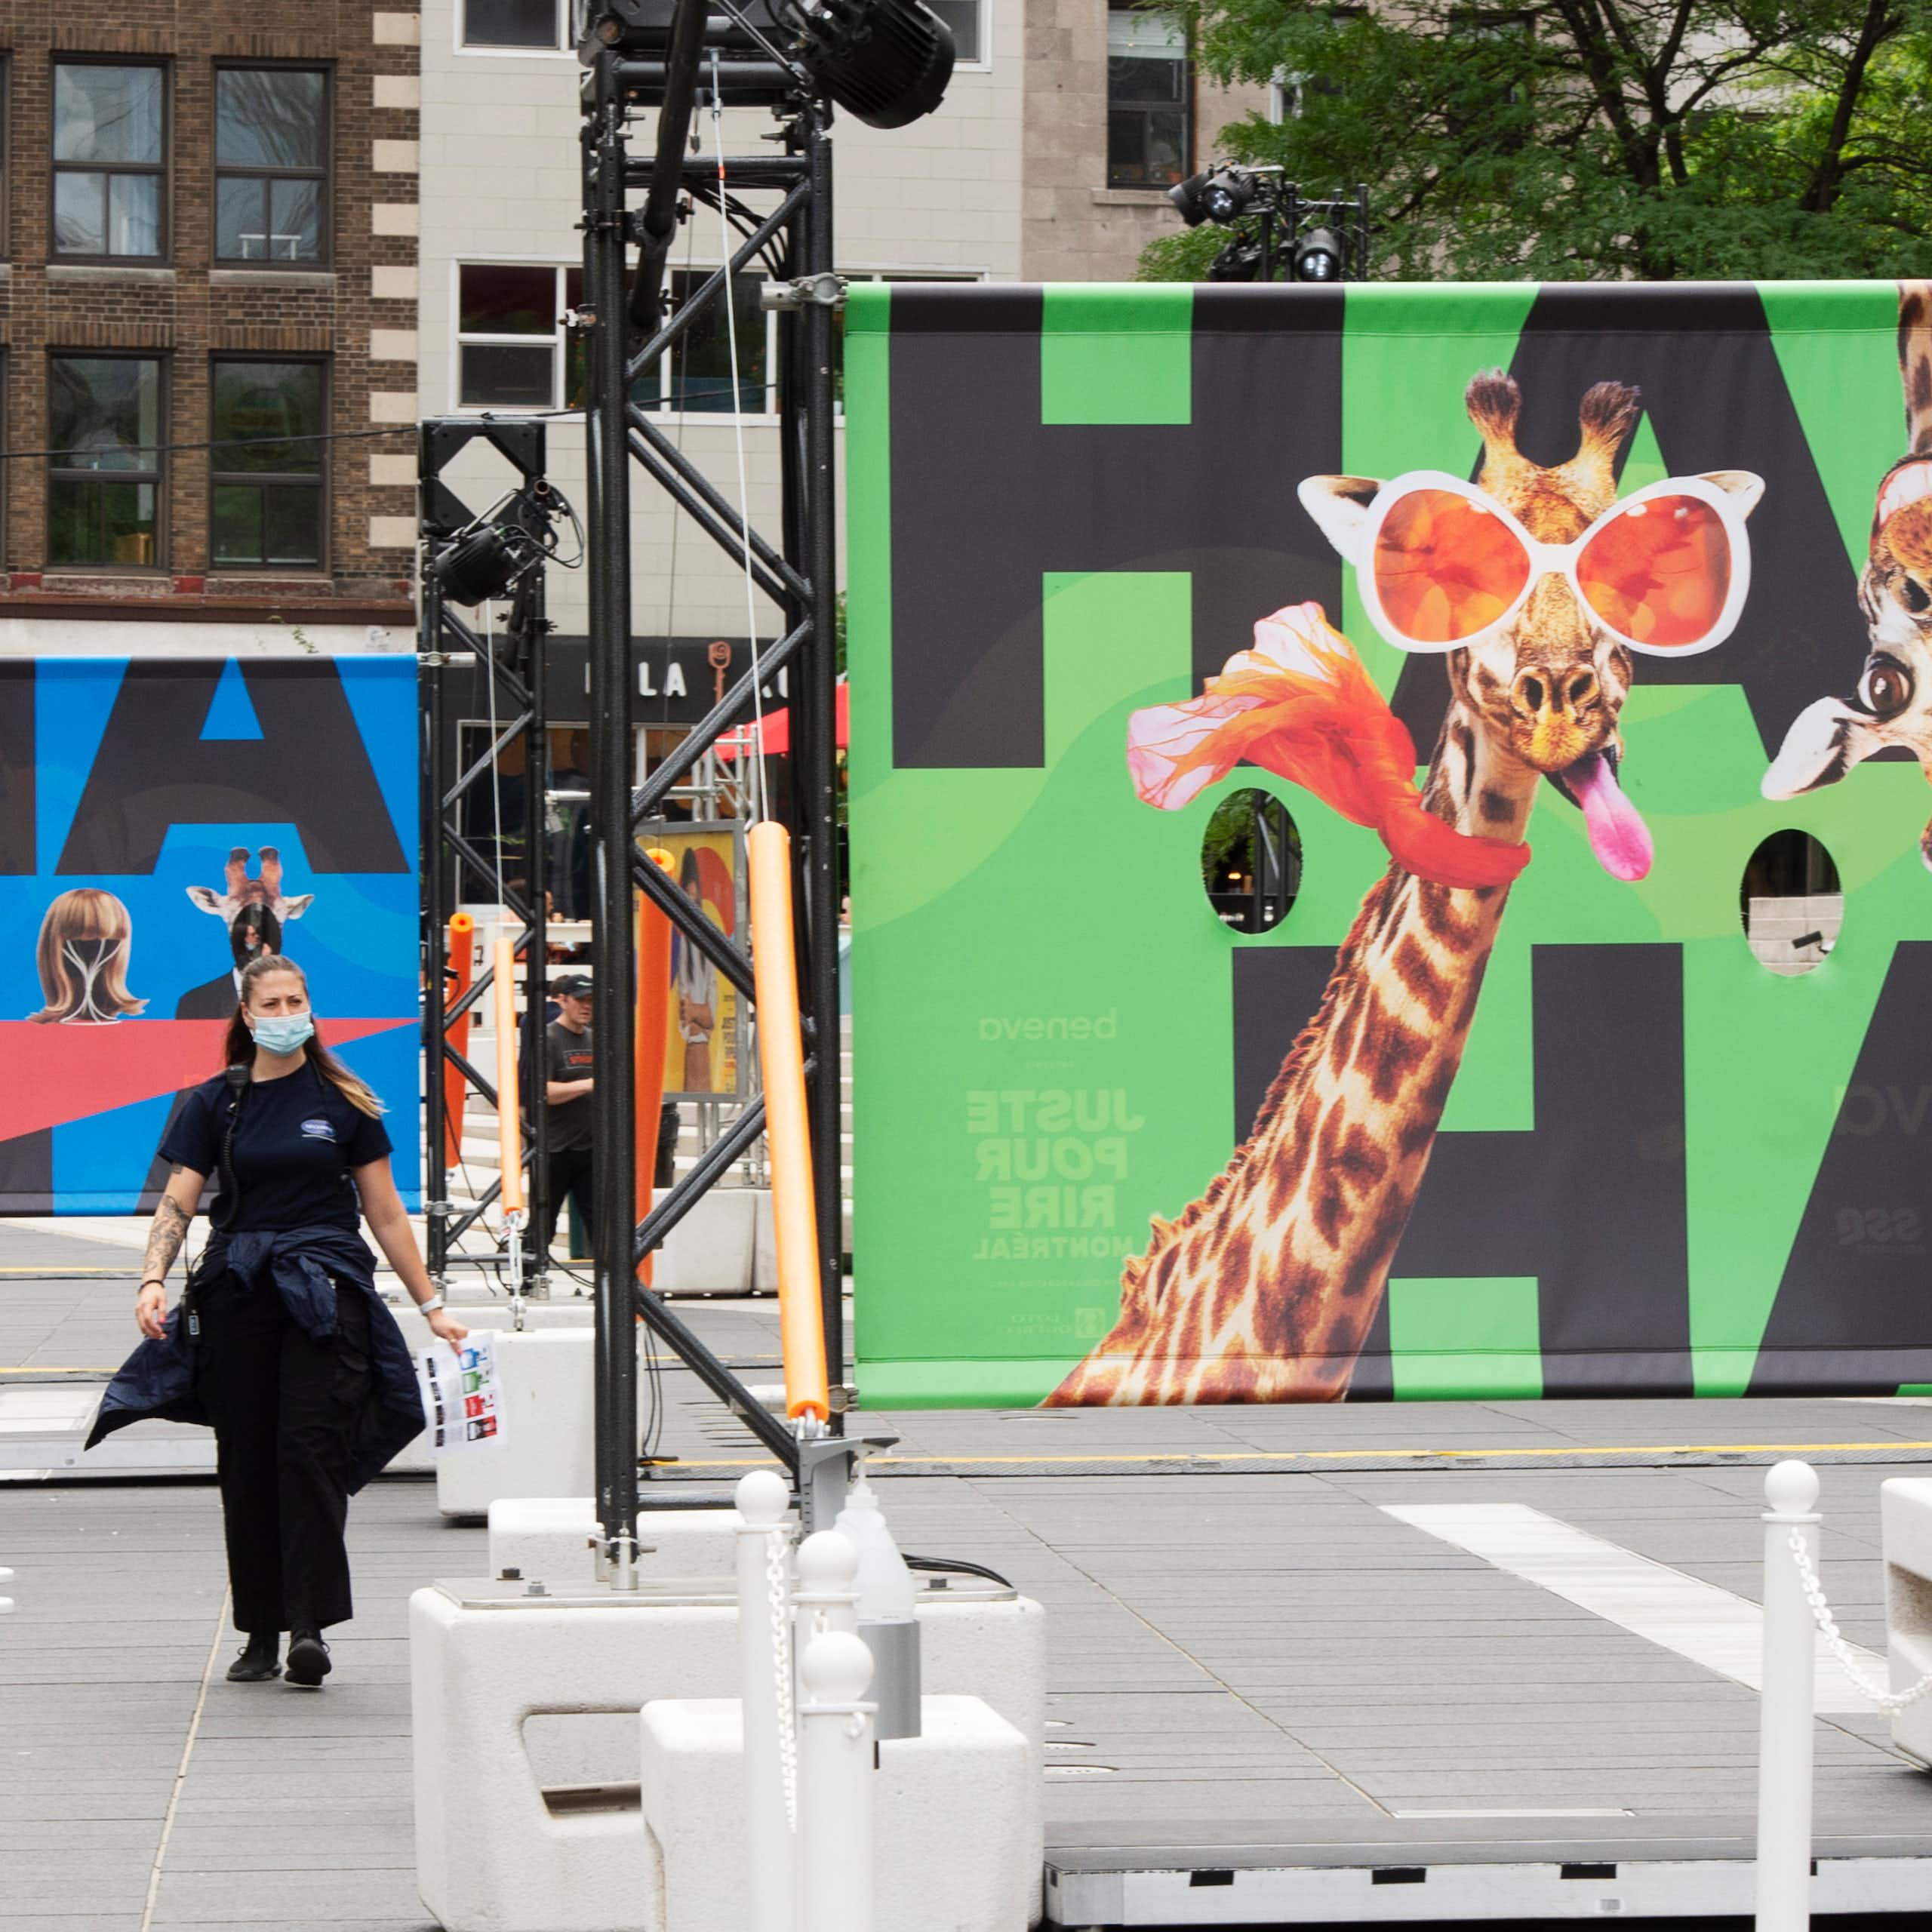 A sign with a giraffe in funny glasses sticking tongue out says 'ha ha' and a person walks past.